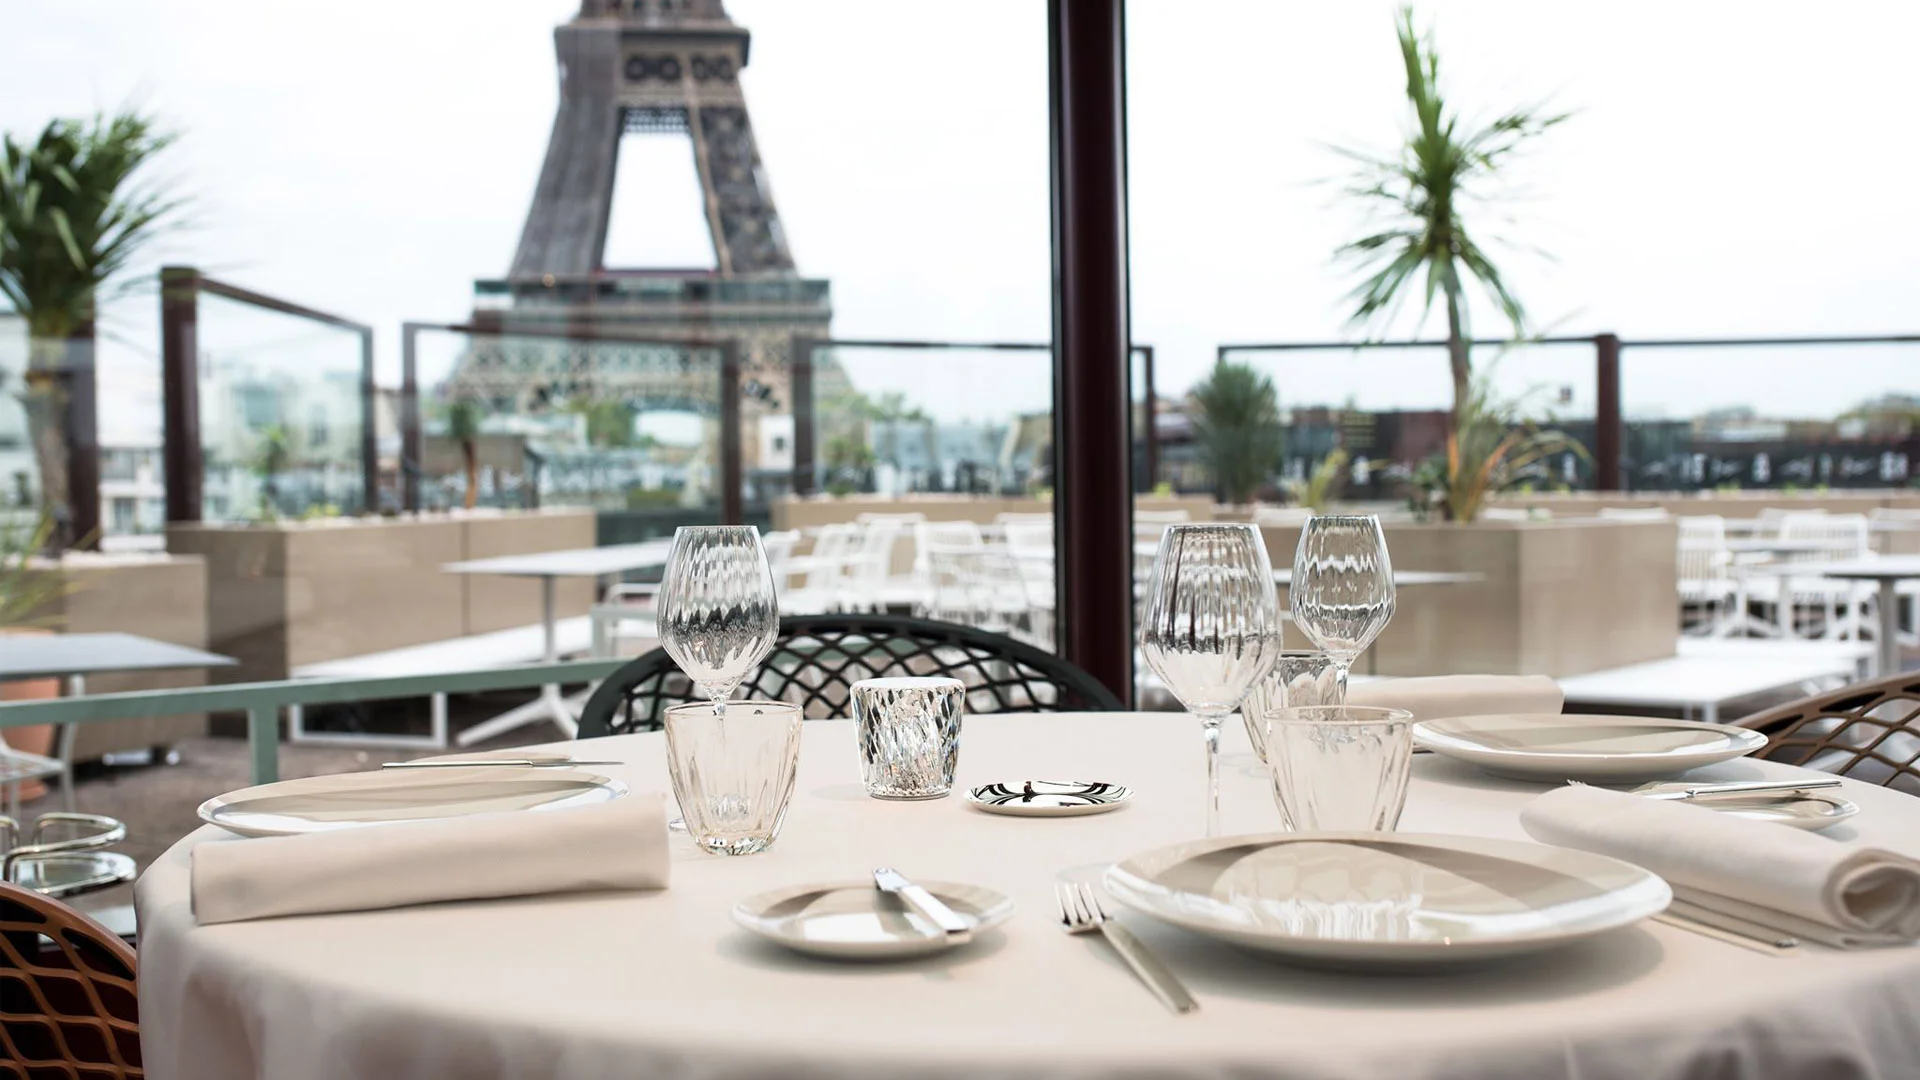 Amazing restaurant with view of Eiffel Tower, Paris